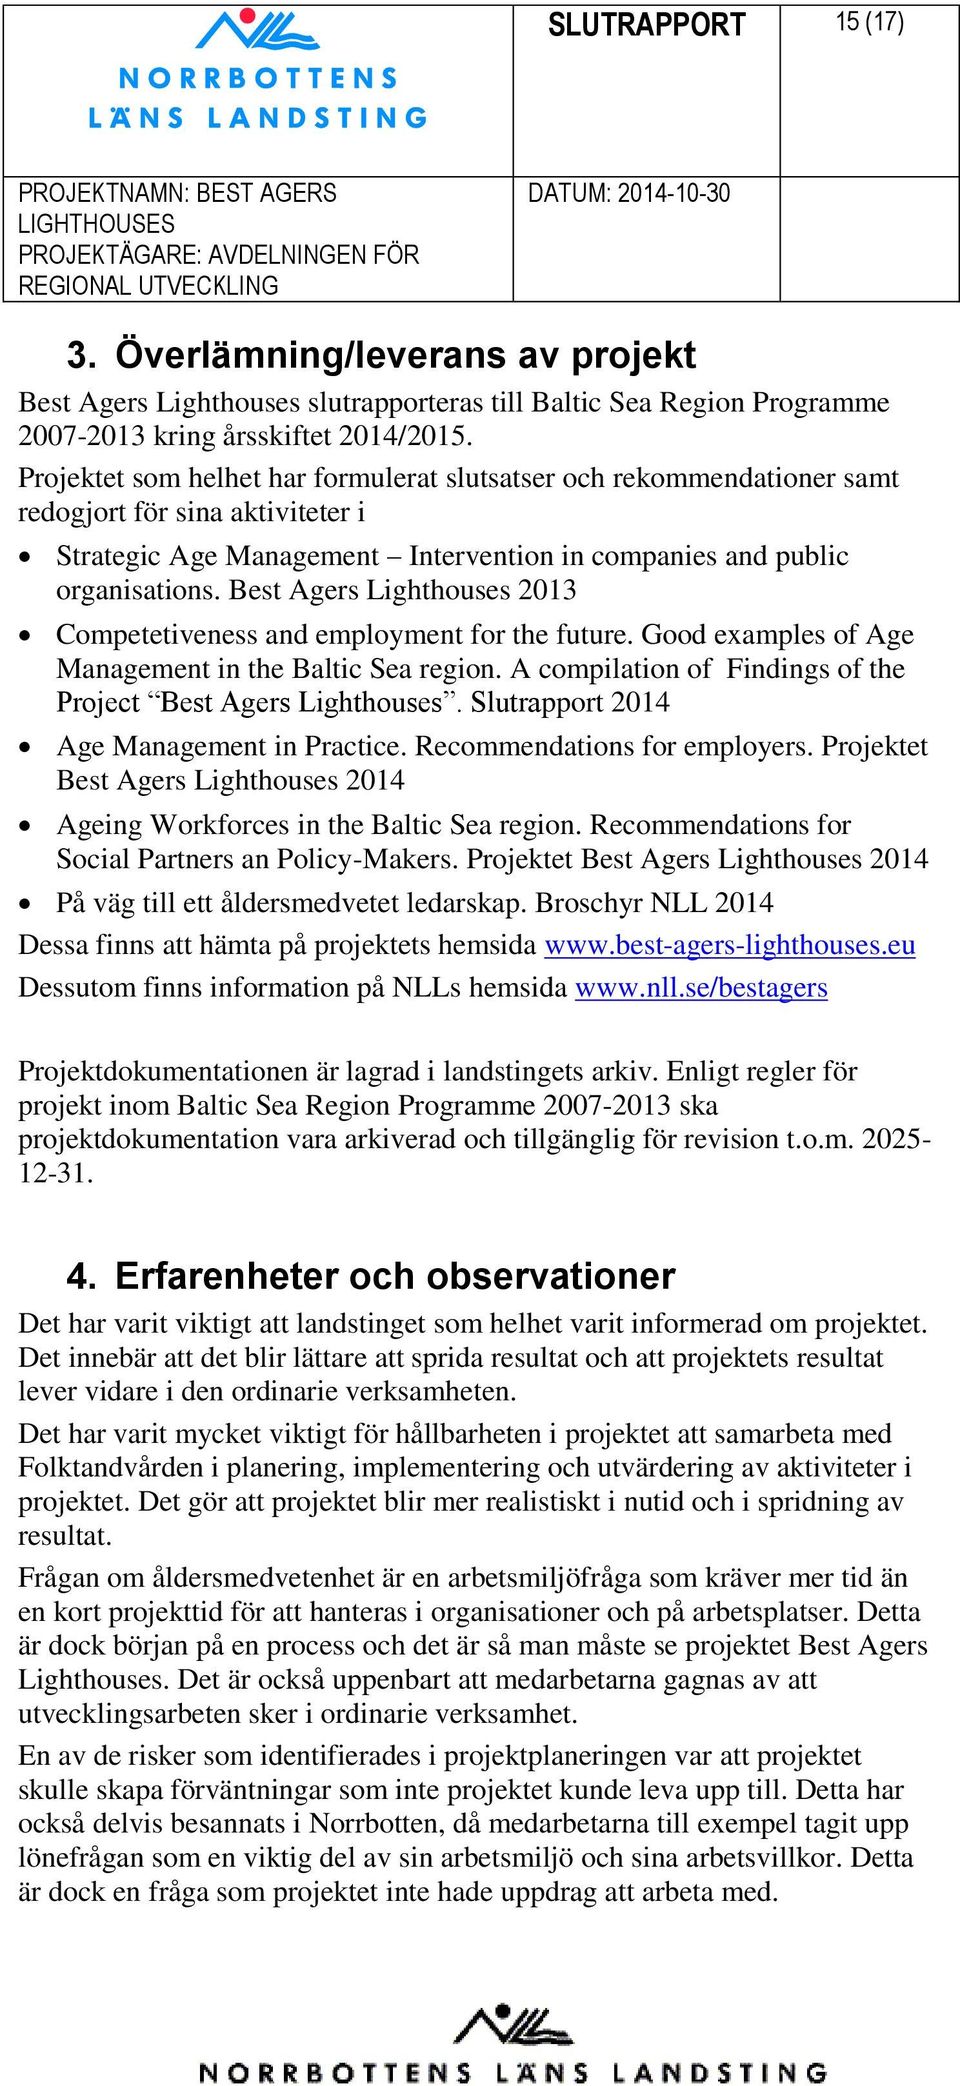 Best Agers Lighthouses 2013 Competetiveness and employment for the future. Good examples of Age Management in the Baltic Sea region. A compilation of Findings of the Project Best Agers Lighthouses.